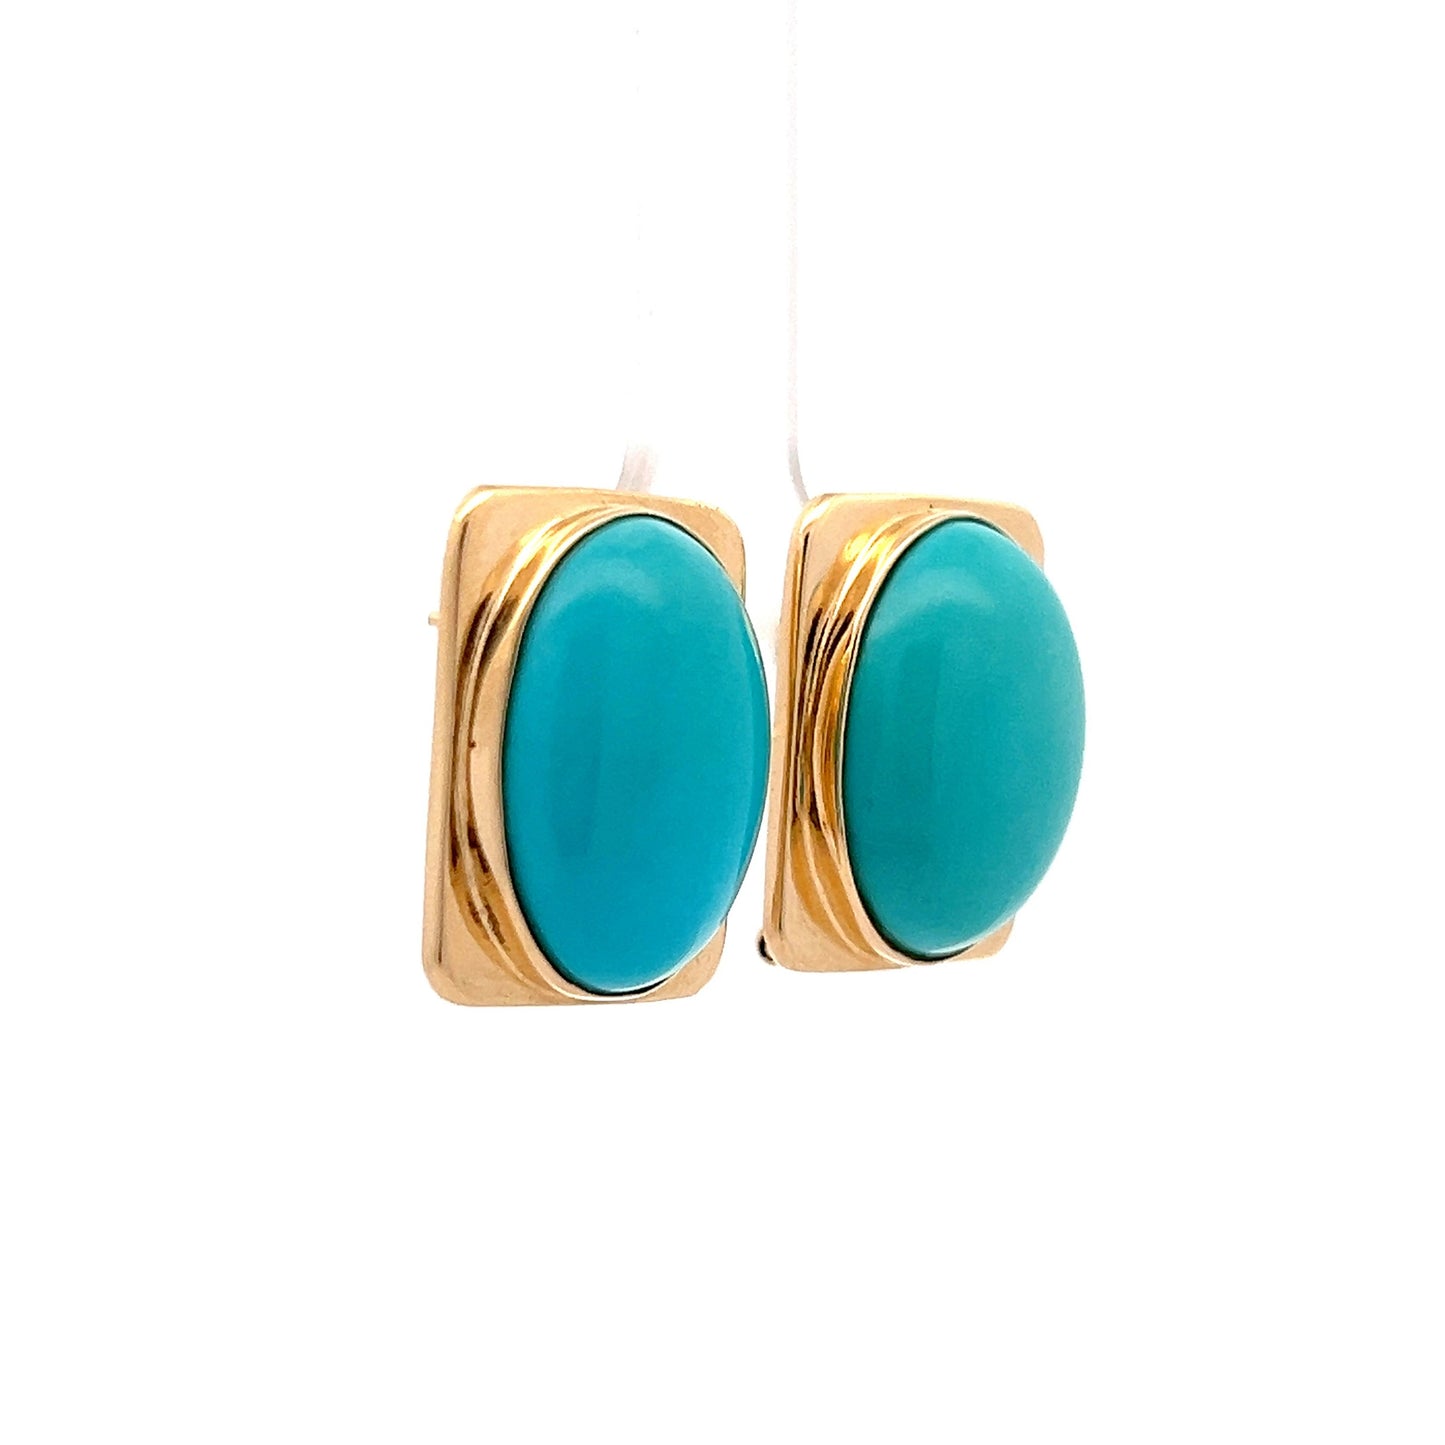 23.12 Cabochon Turquoise Earrings in 14k Yellow Gold